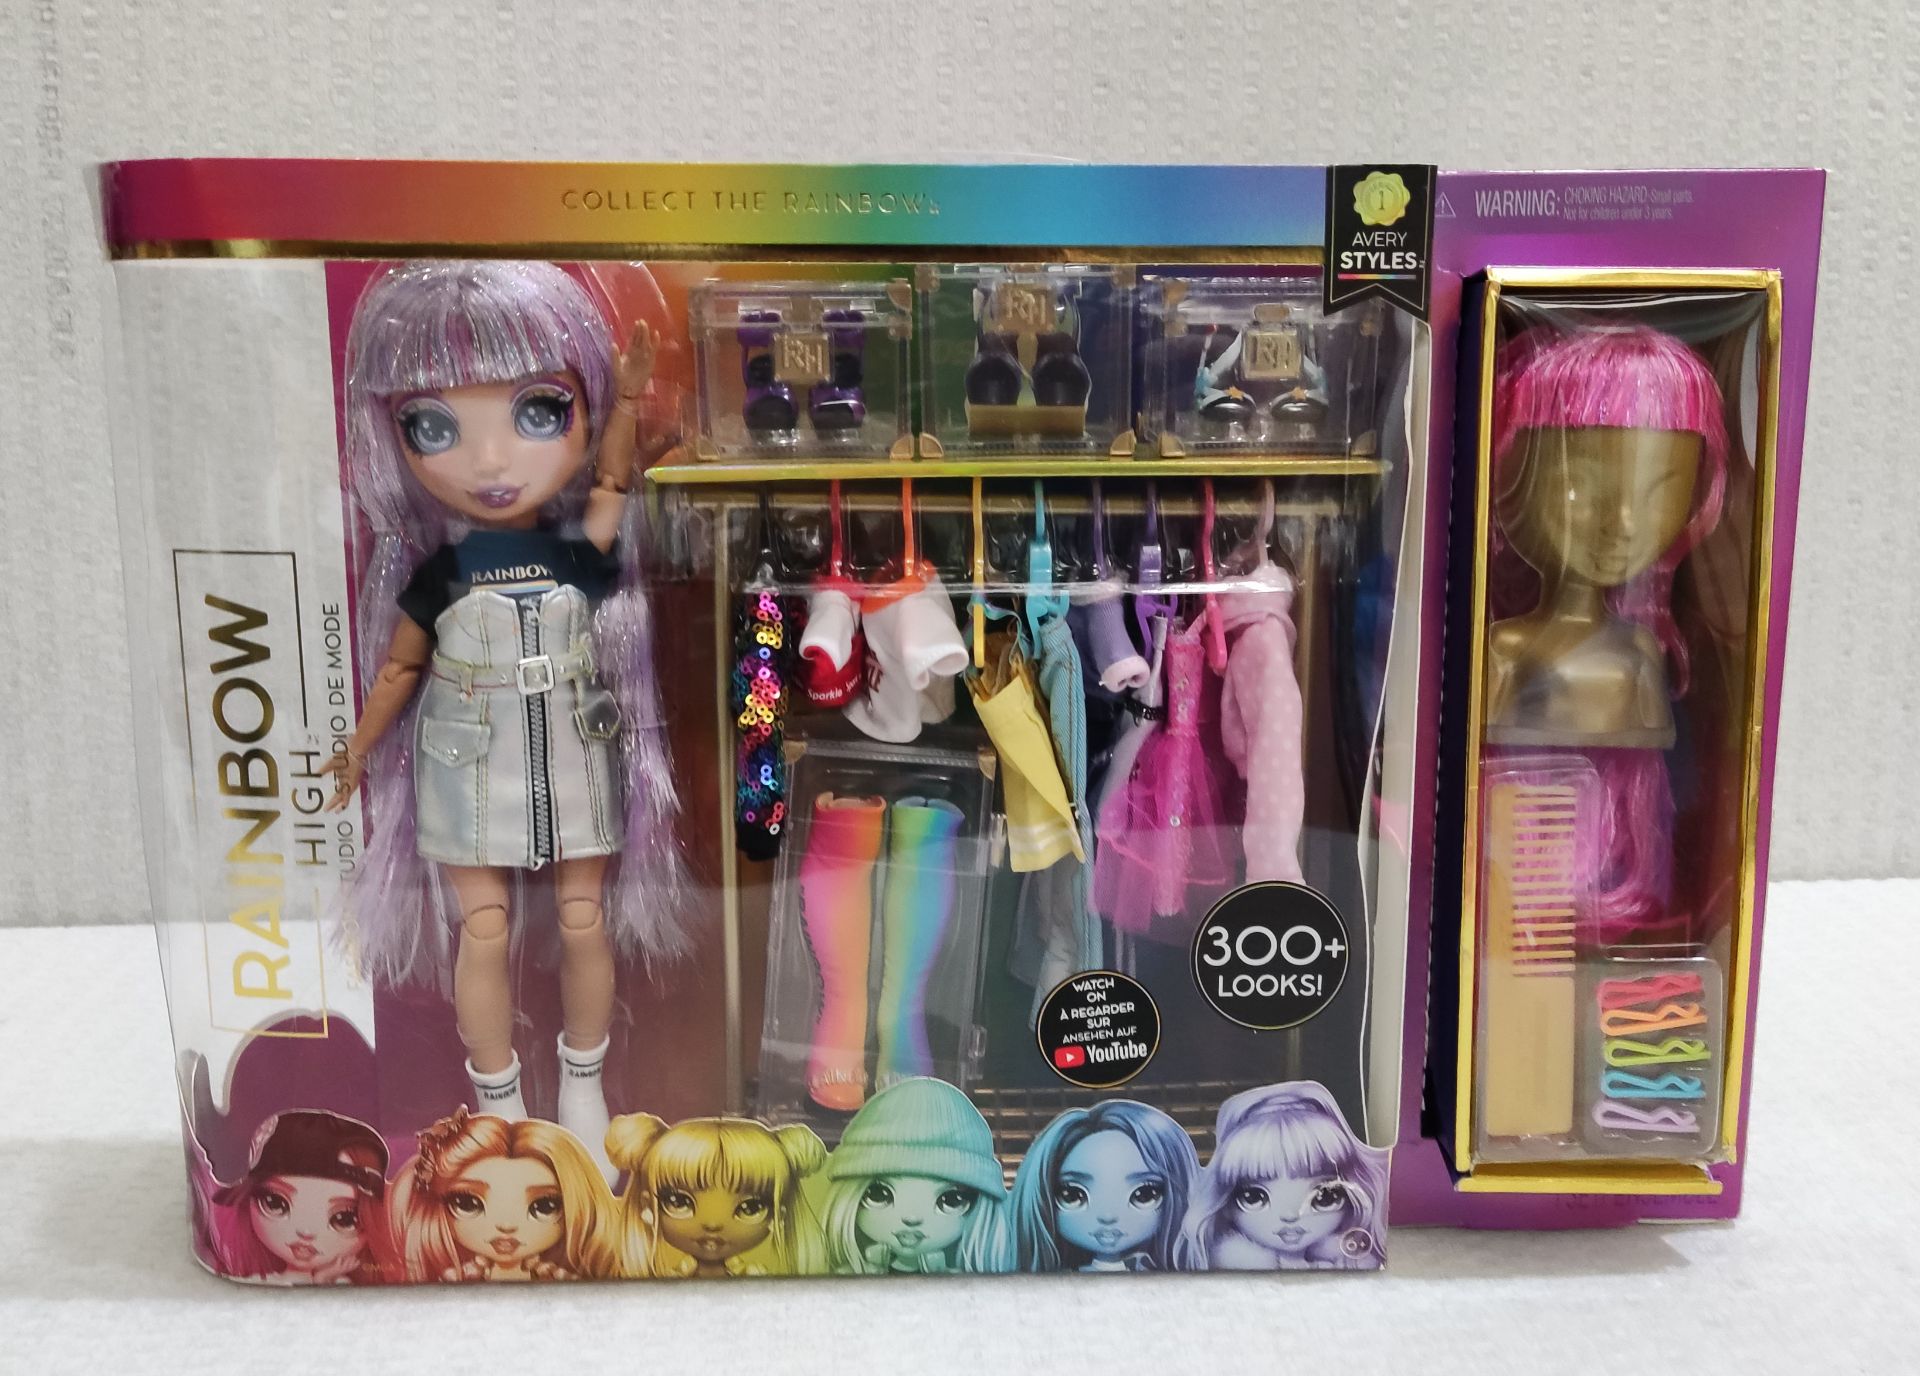 1 x Rainbow High Avery Styles Doll And Fashion Studio - New/Boxed - Image 2 of 4